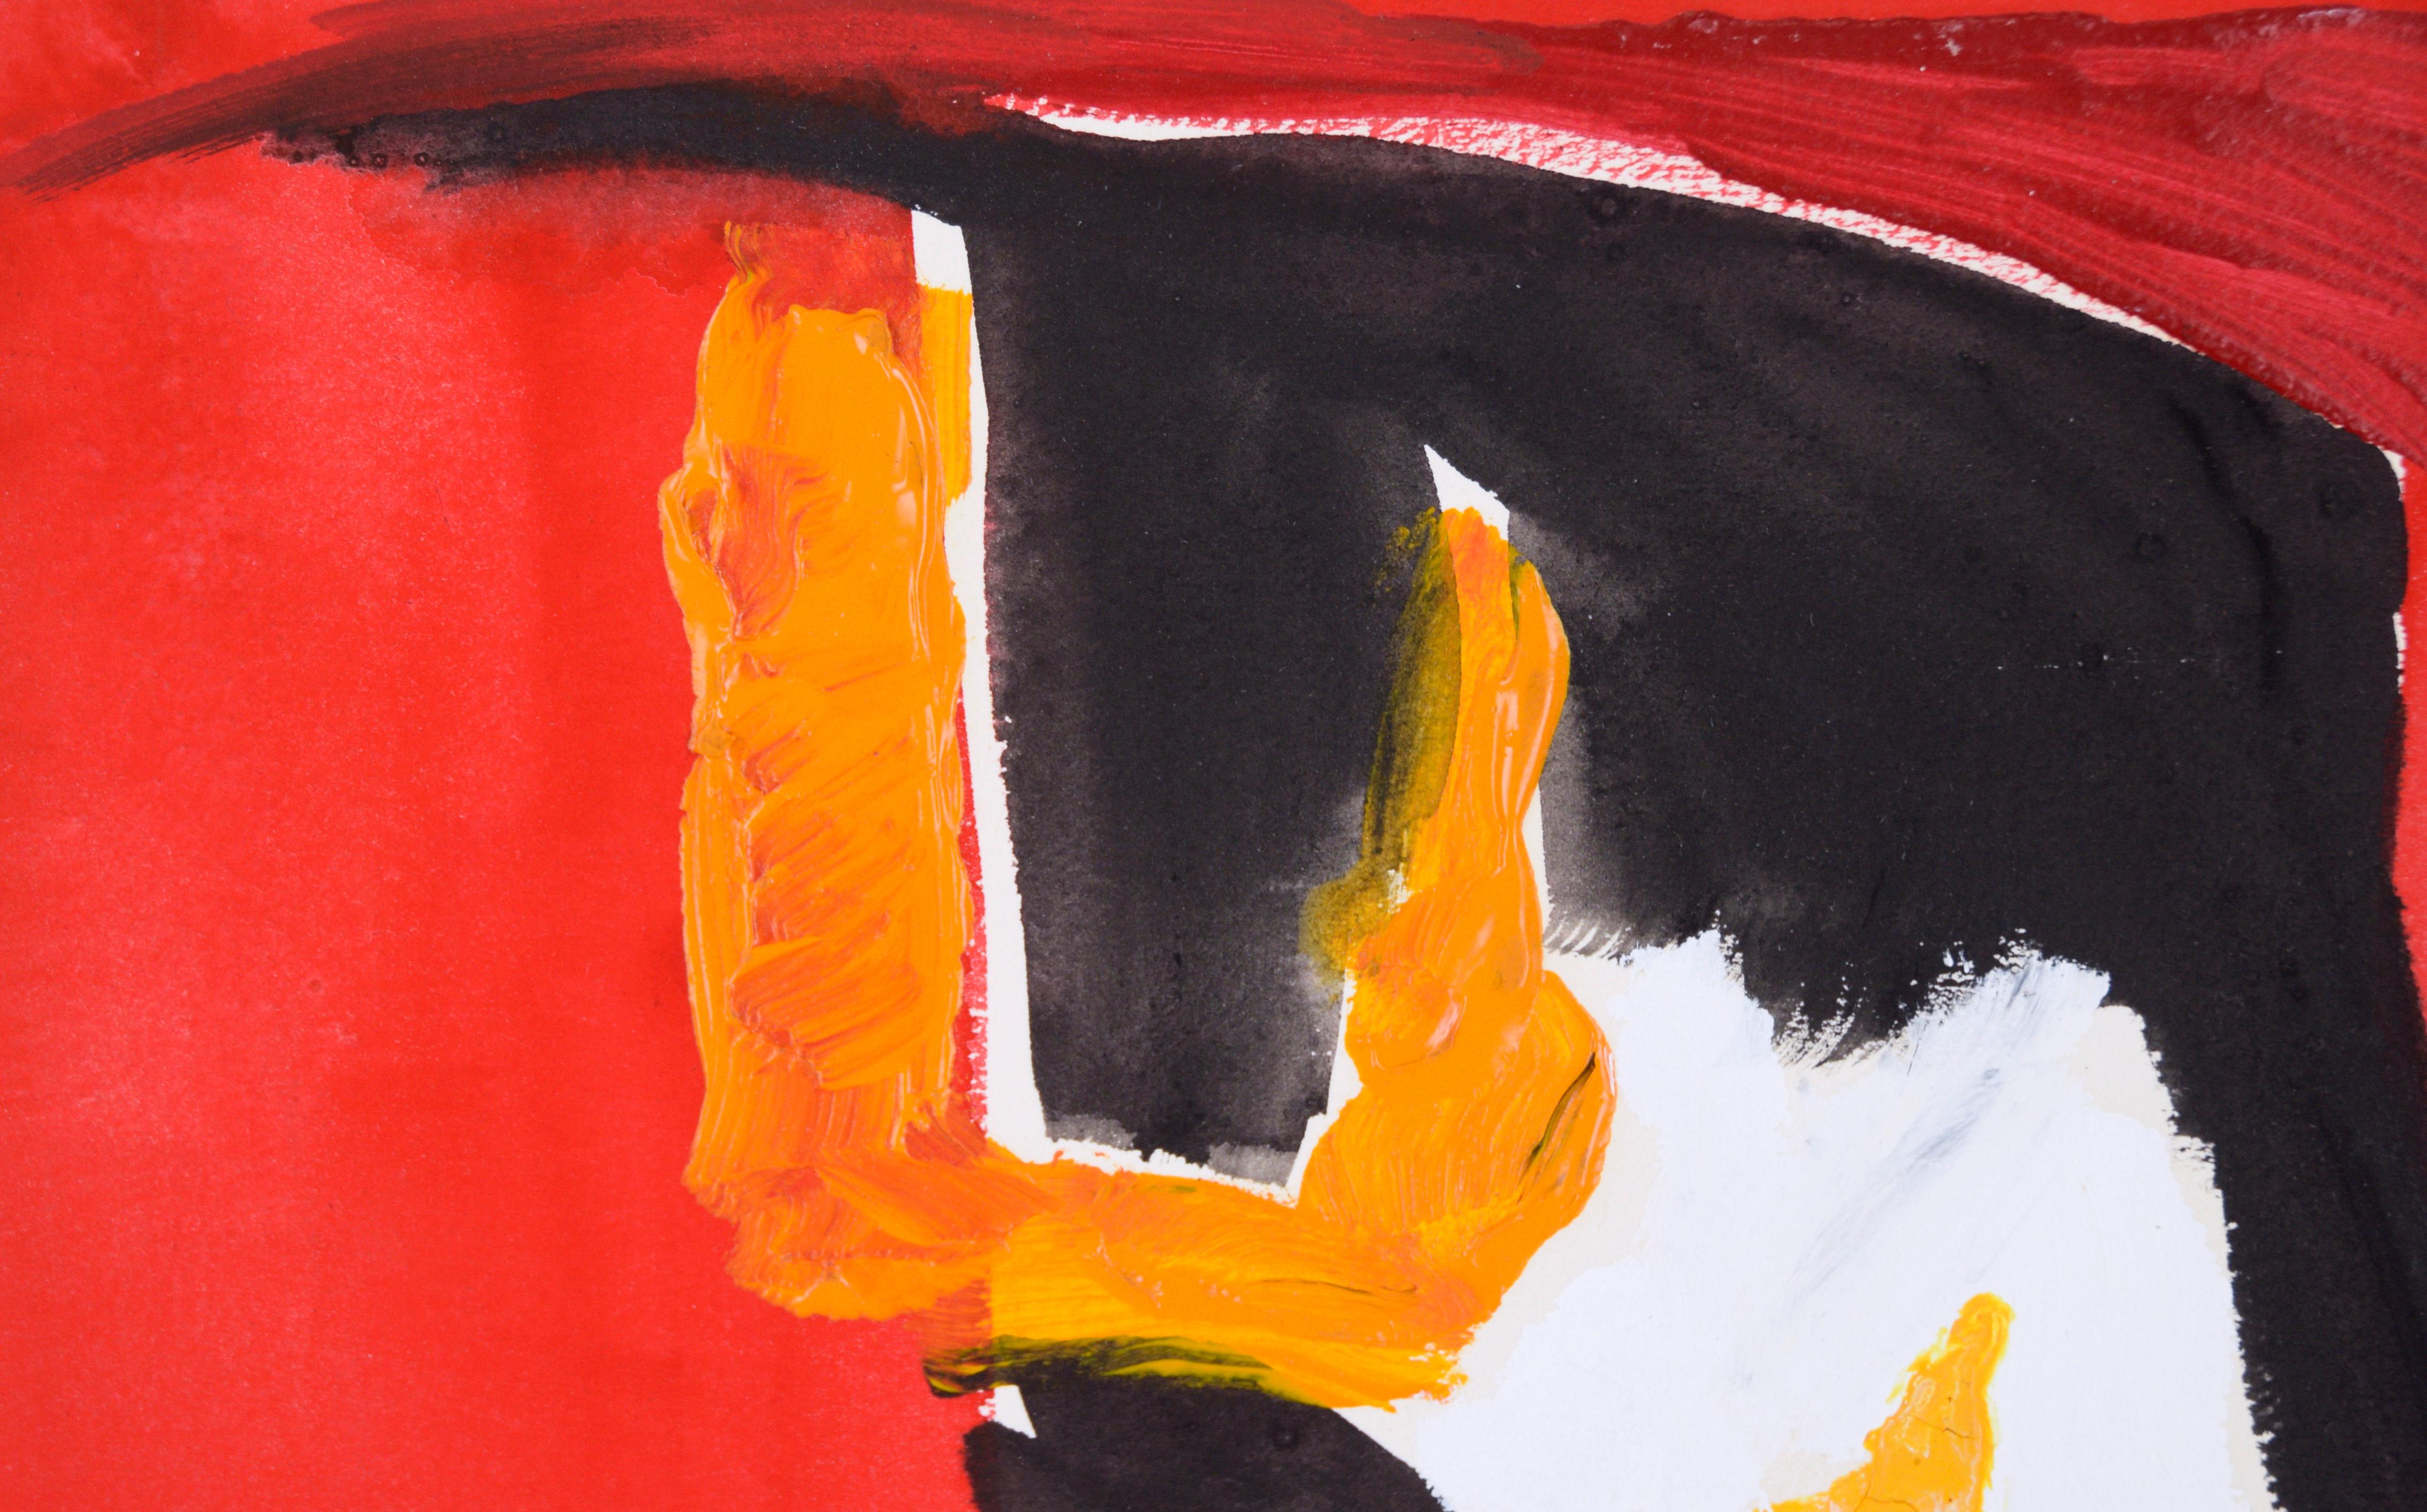 Red with Black, White and Orange - Expressionist Composition in Acrylic on Paper - Painting by Ricardo de Silva